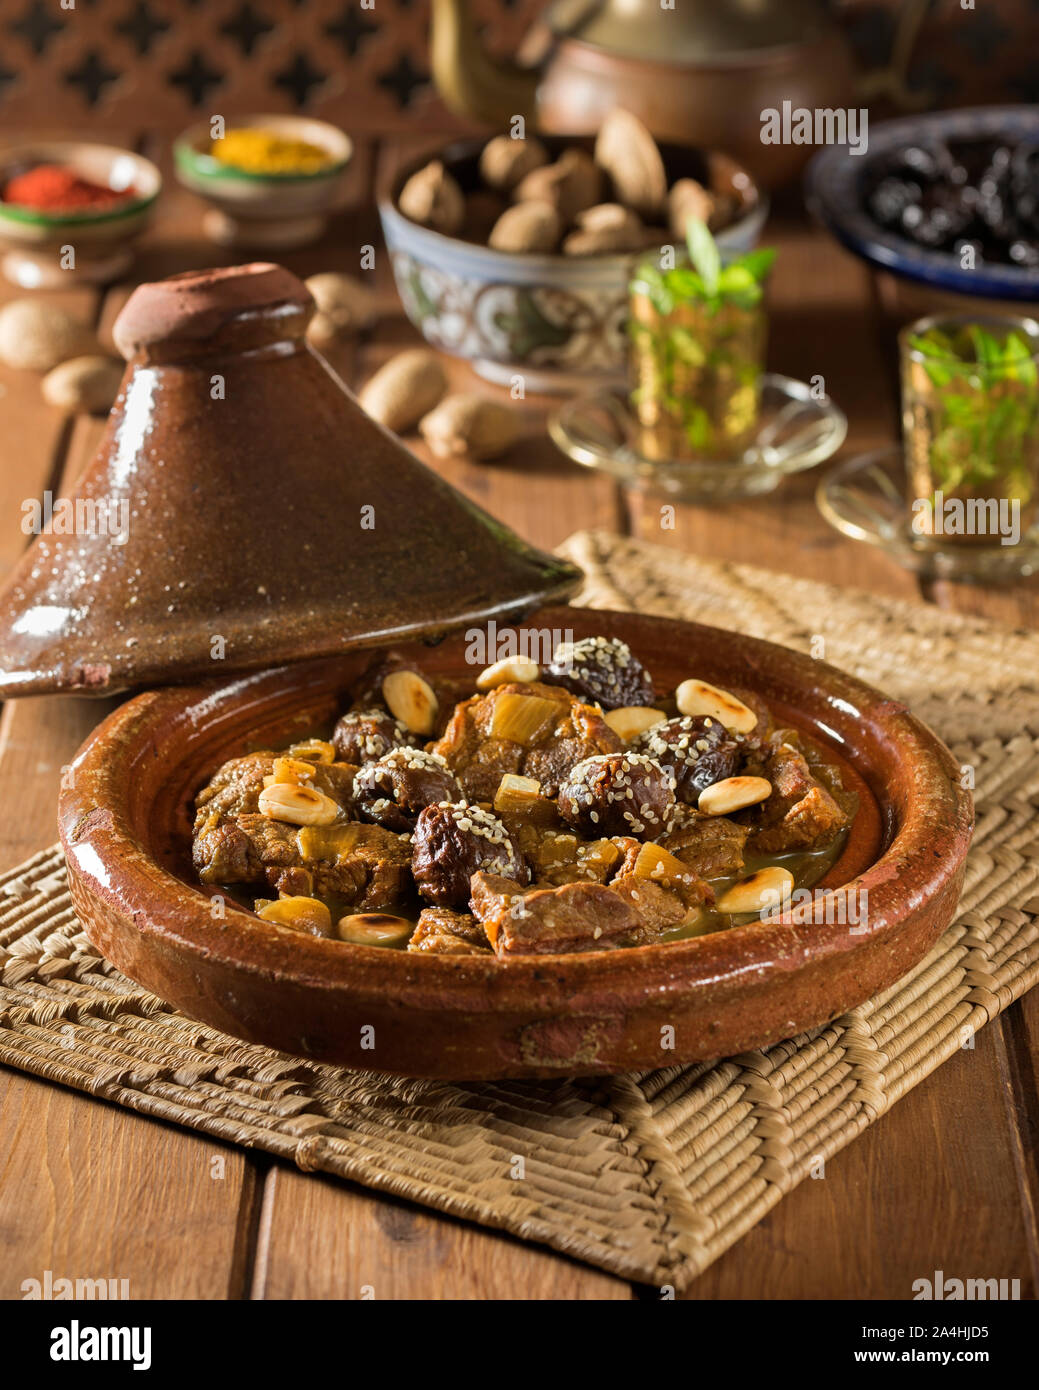 Tagine of lamb with prunes and almonds. Morocco Food Stock Photo